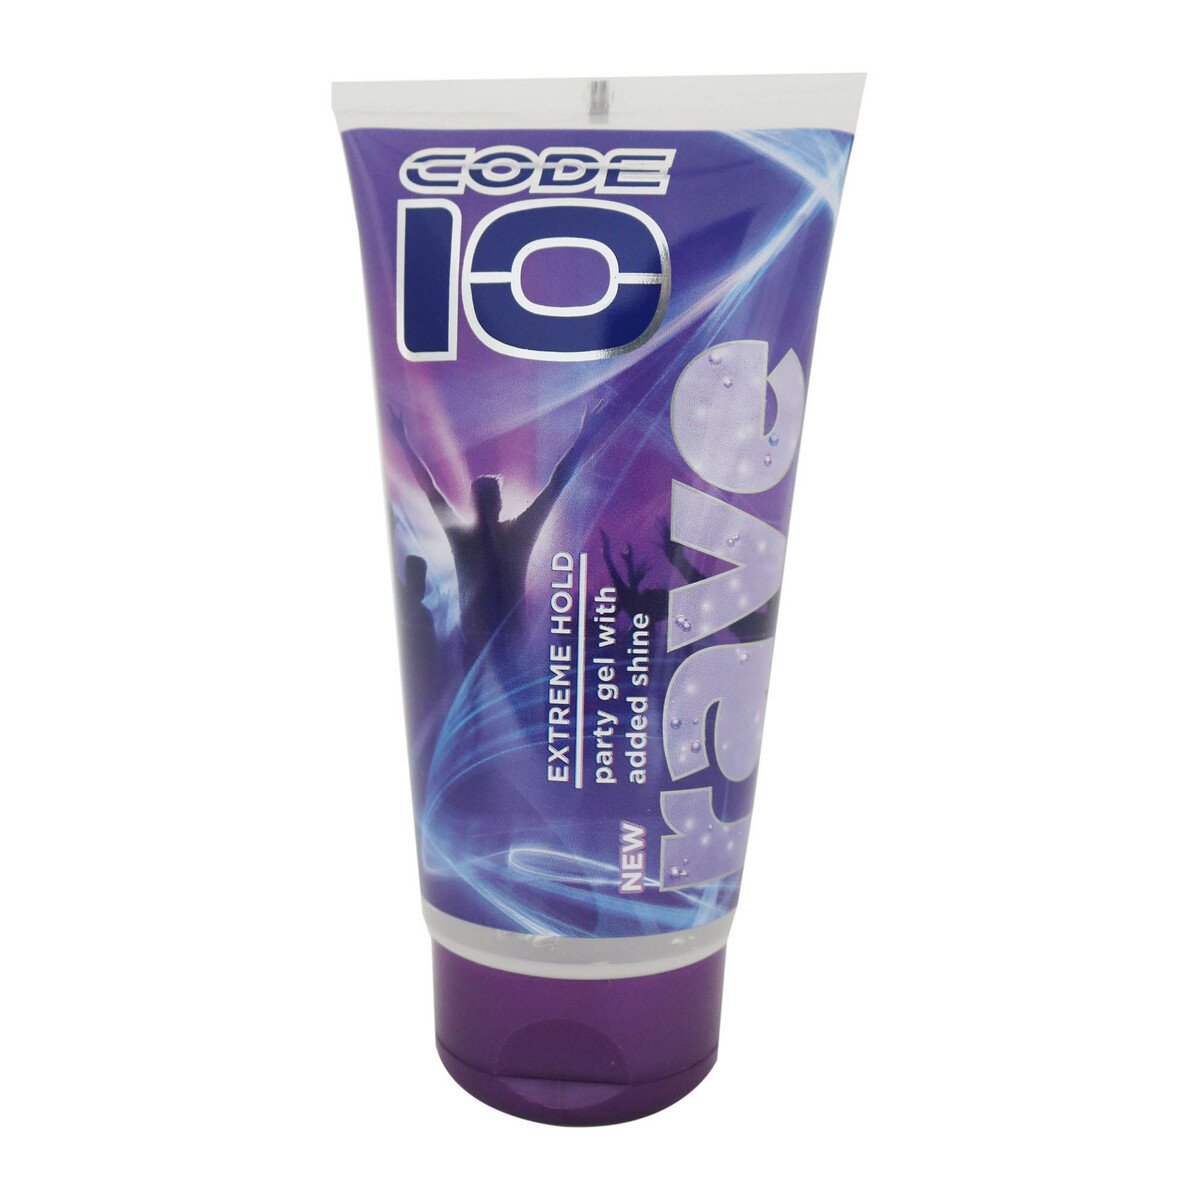 Code 10 Gel Rave Party Extreme Hold 150ml